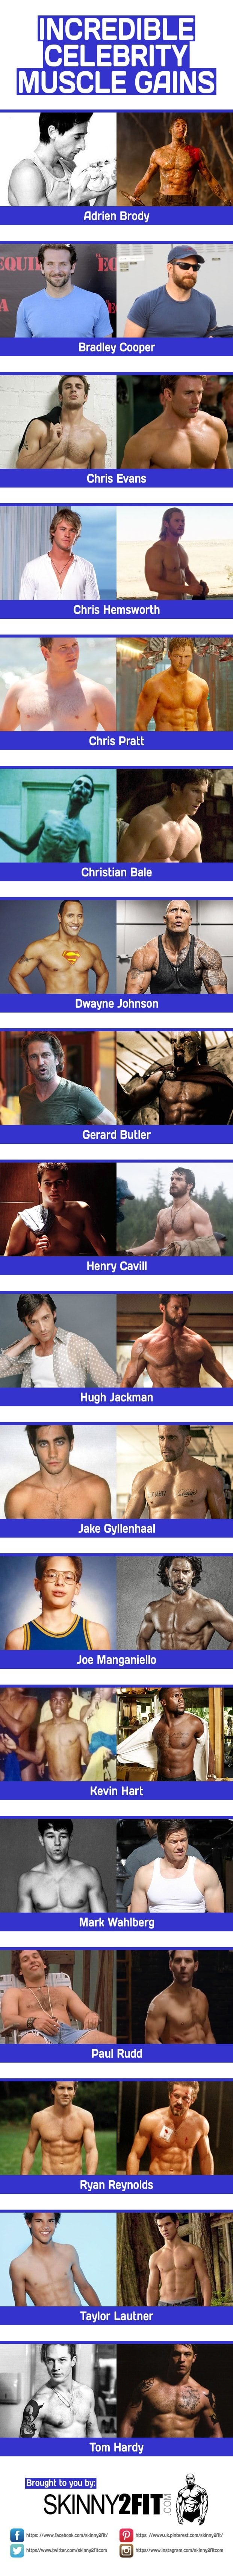 Celebrity Muscle Transformations